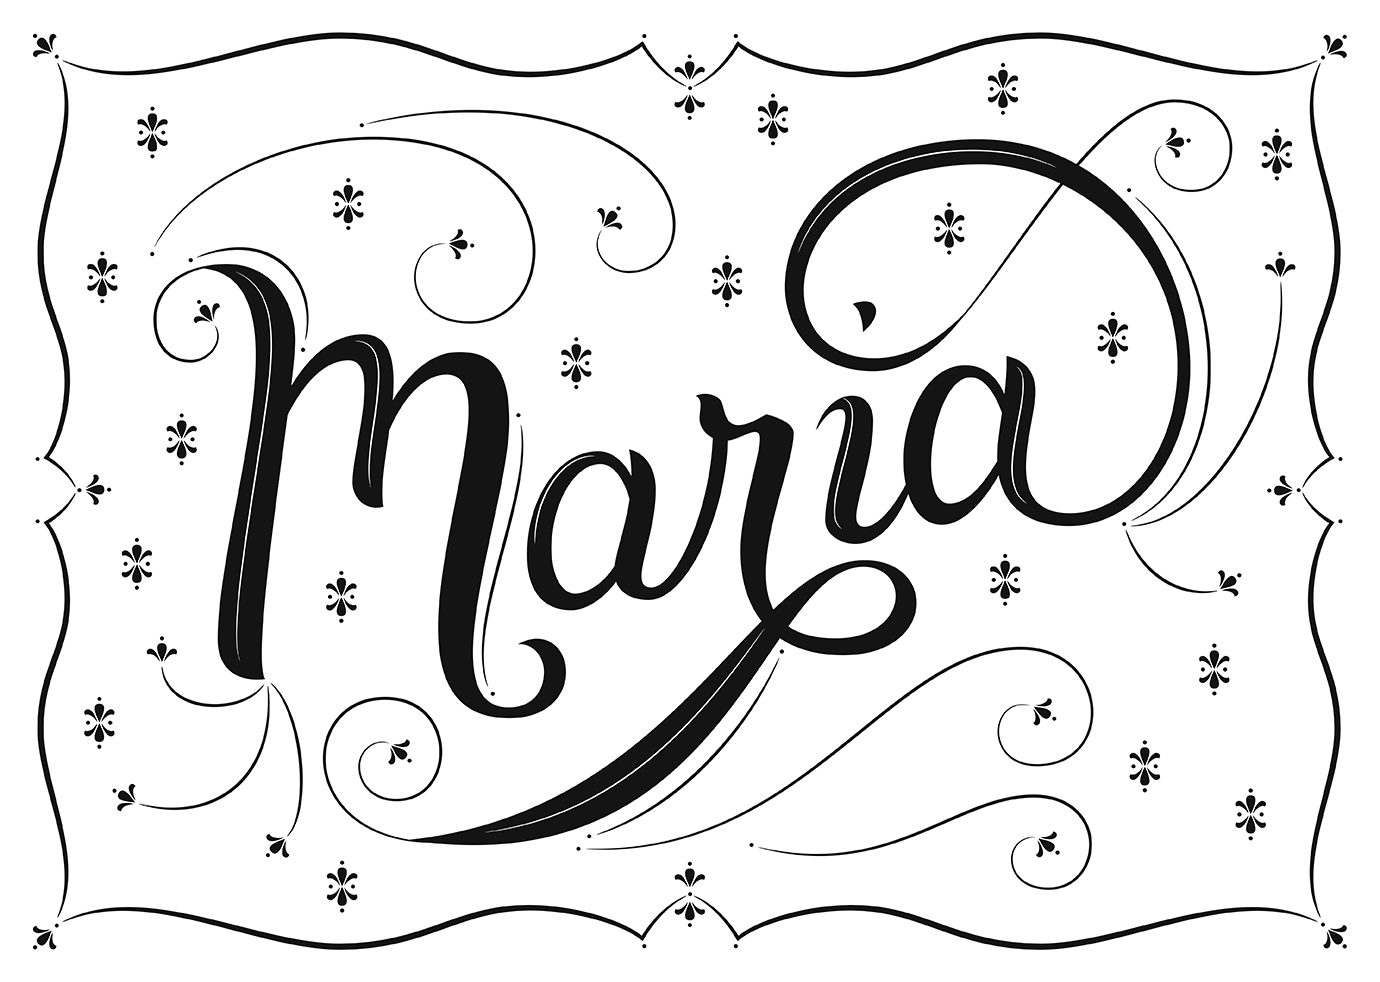 Lettering piece "Maria" black and white